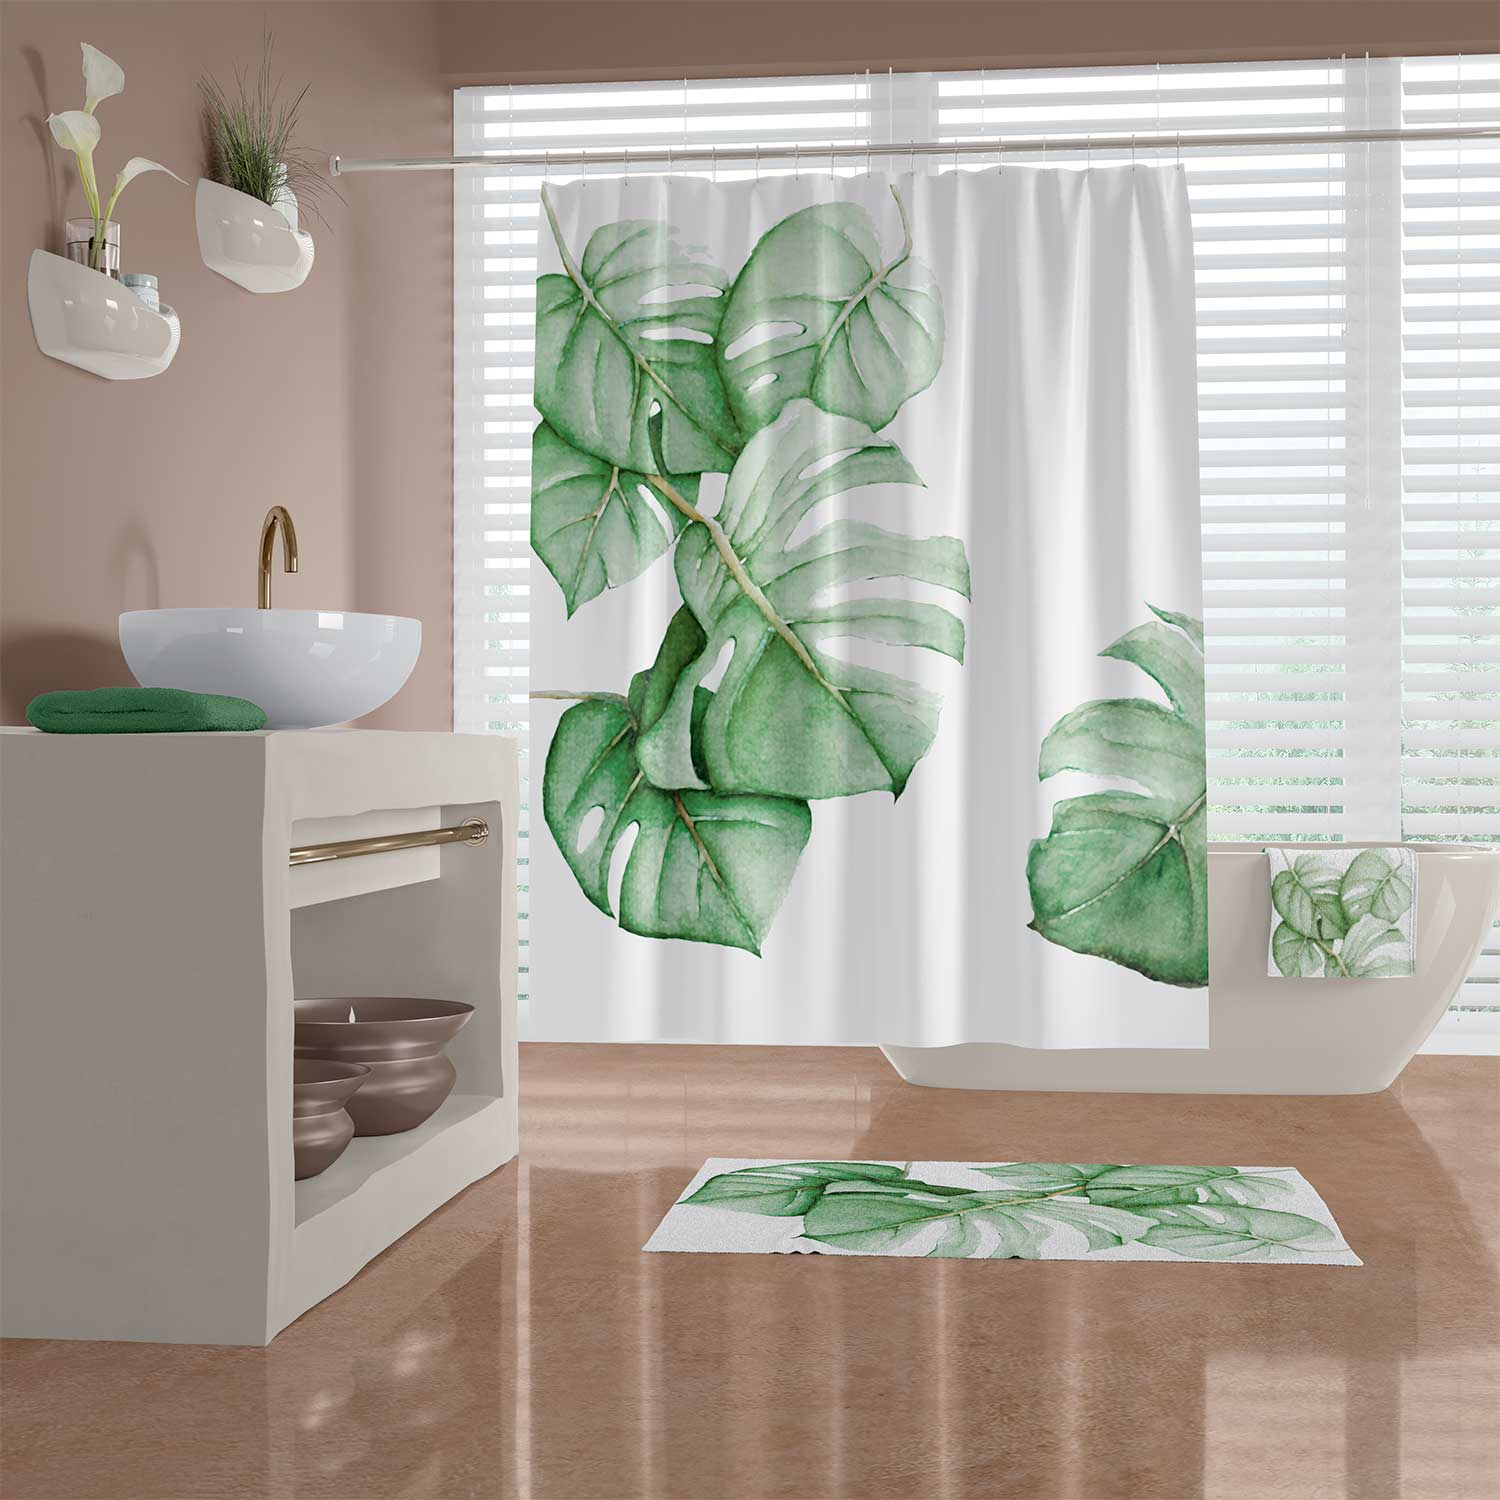 Vibrant green palm leaves shower curtain by Ozscape Designs